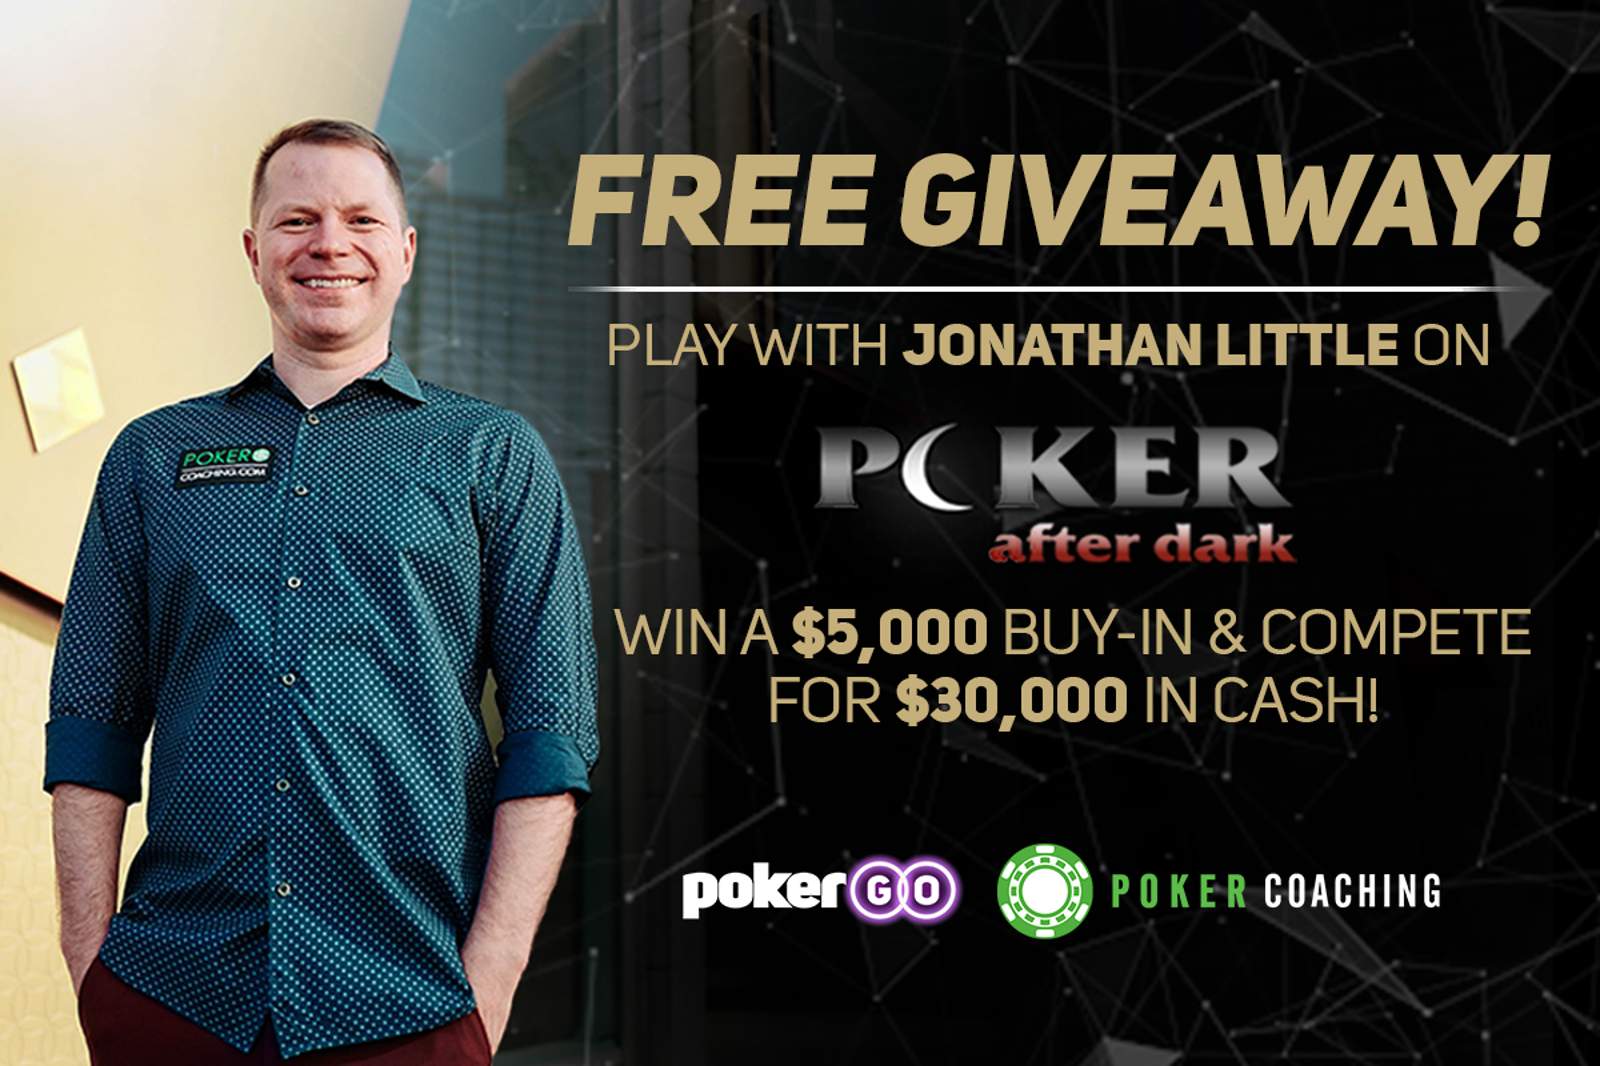 Last Chance to Win a $5K Seat on Poker After Dark with Jonathan Little and PokerCoaching